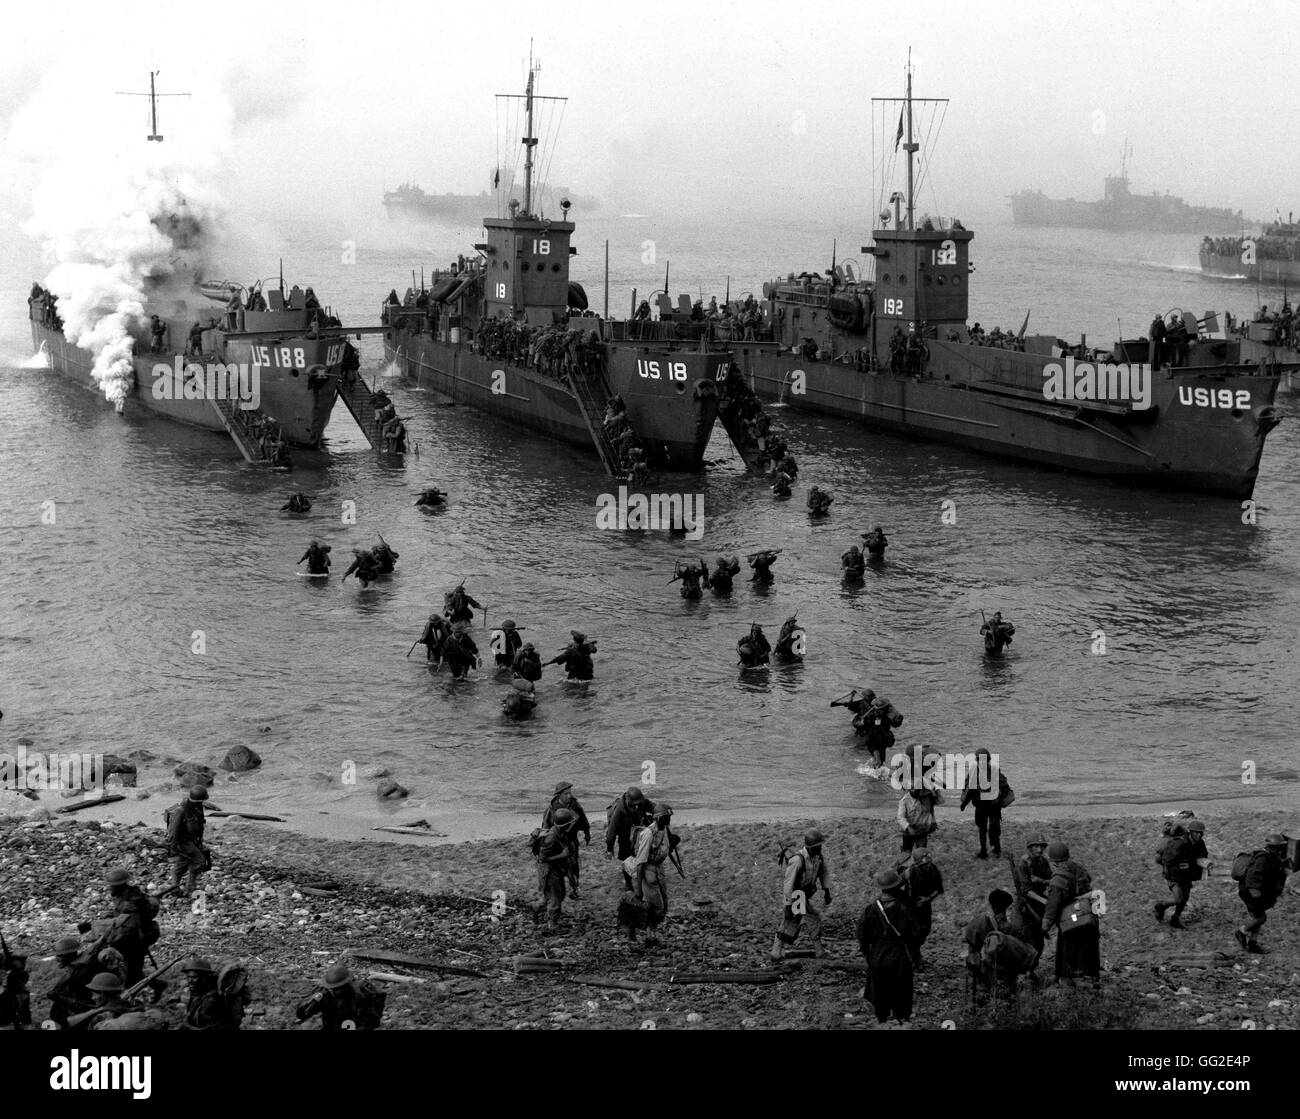 The 9th Colonial Infantry Division landing from a LCI (Landing Craft Infantry) to invade Elba June 17, 1944 Elba, Second World War war National archives, Washington Stock Photo